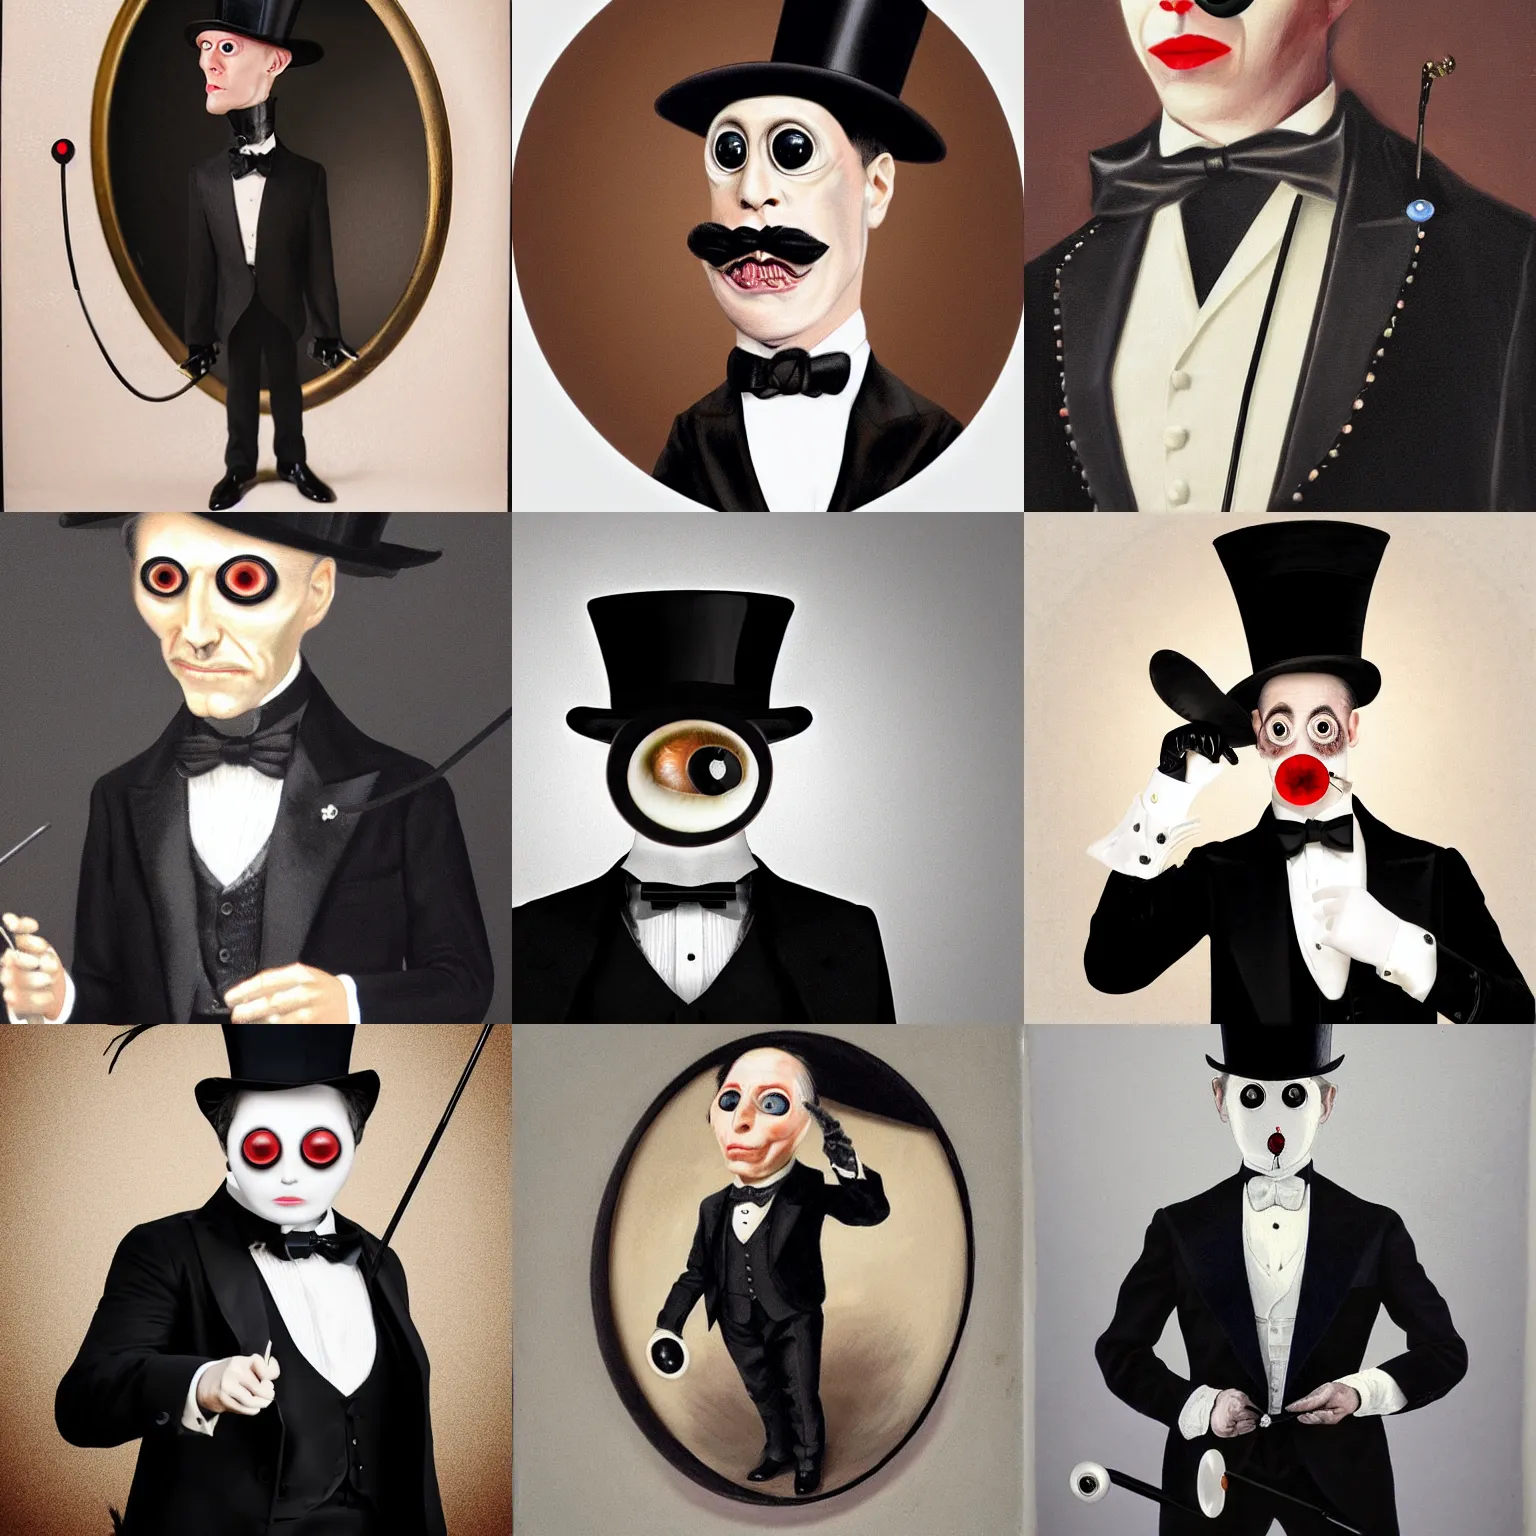 Prompt: hyperreal lifelike portrait of eyeball headed gentleman, impeccably dressed in elegant black tailcoat tuxedo and top hat with theatrical walking cane, large round spherical eyeball with veiny bloodshot orb